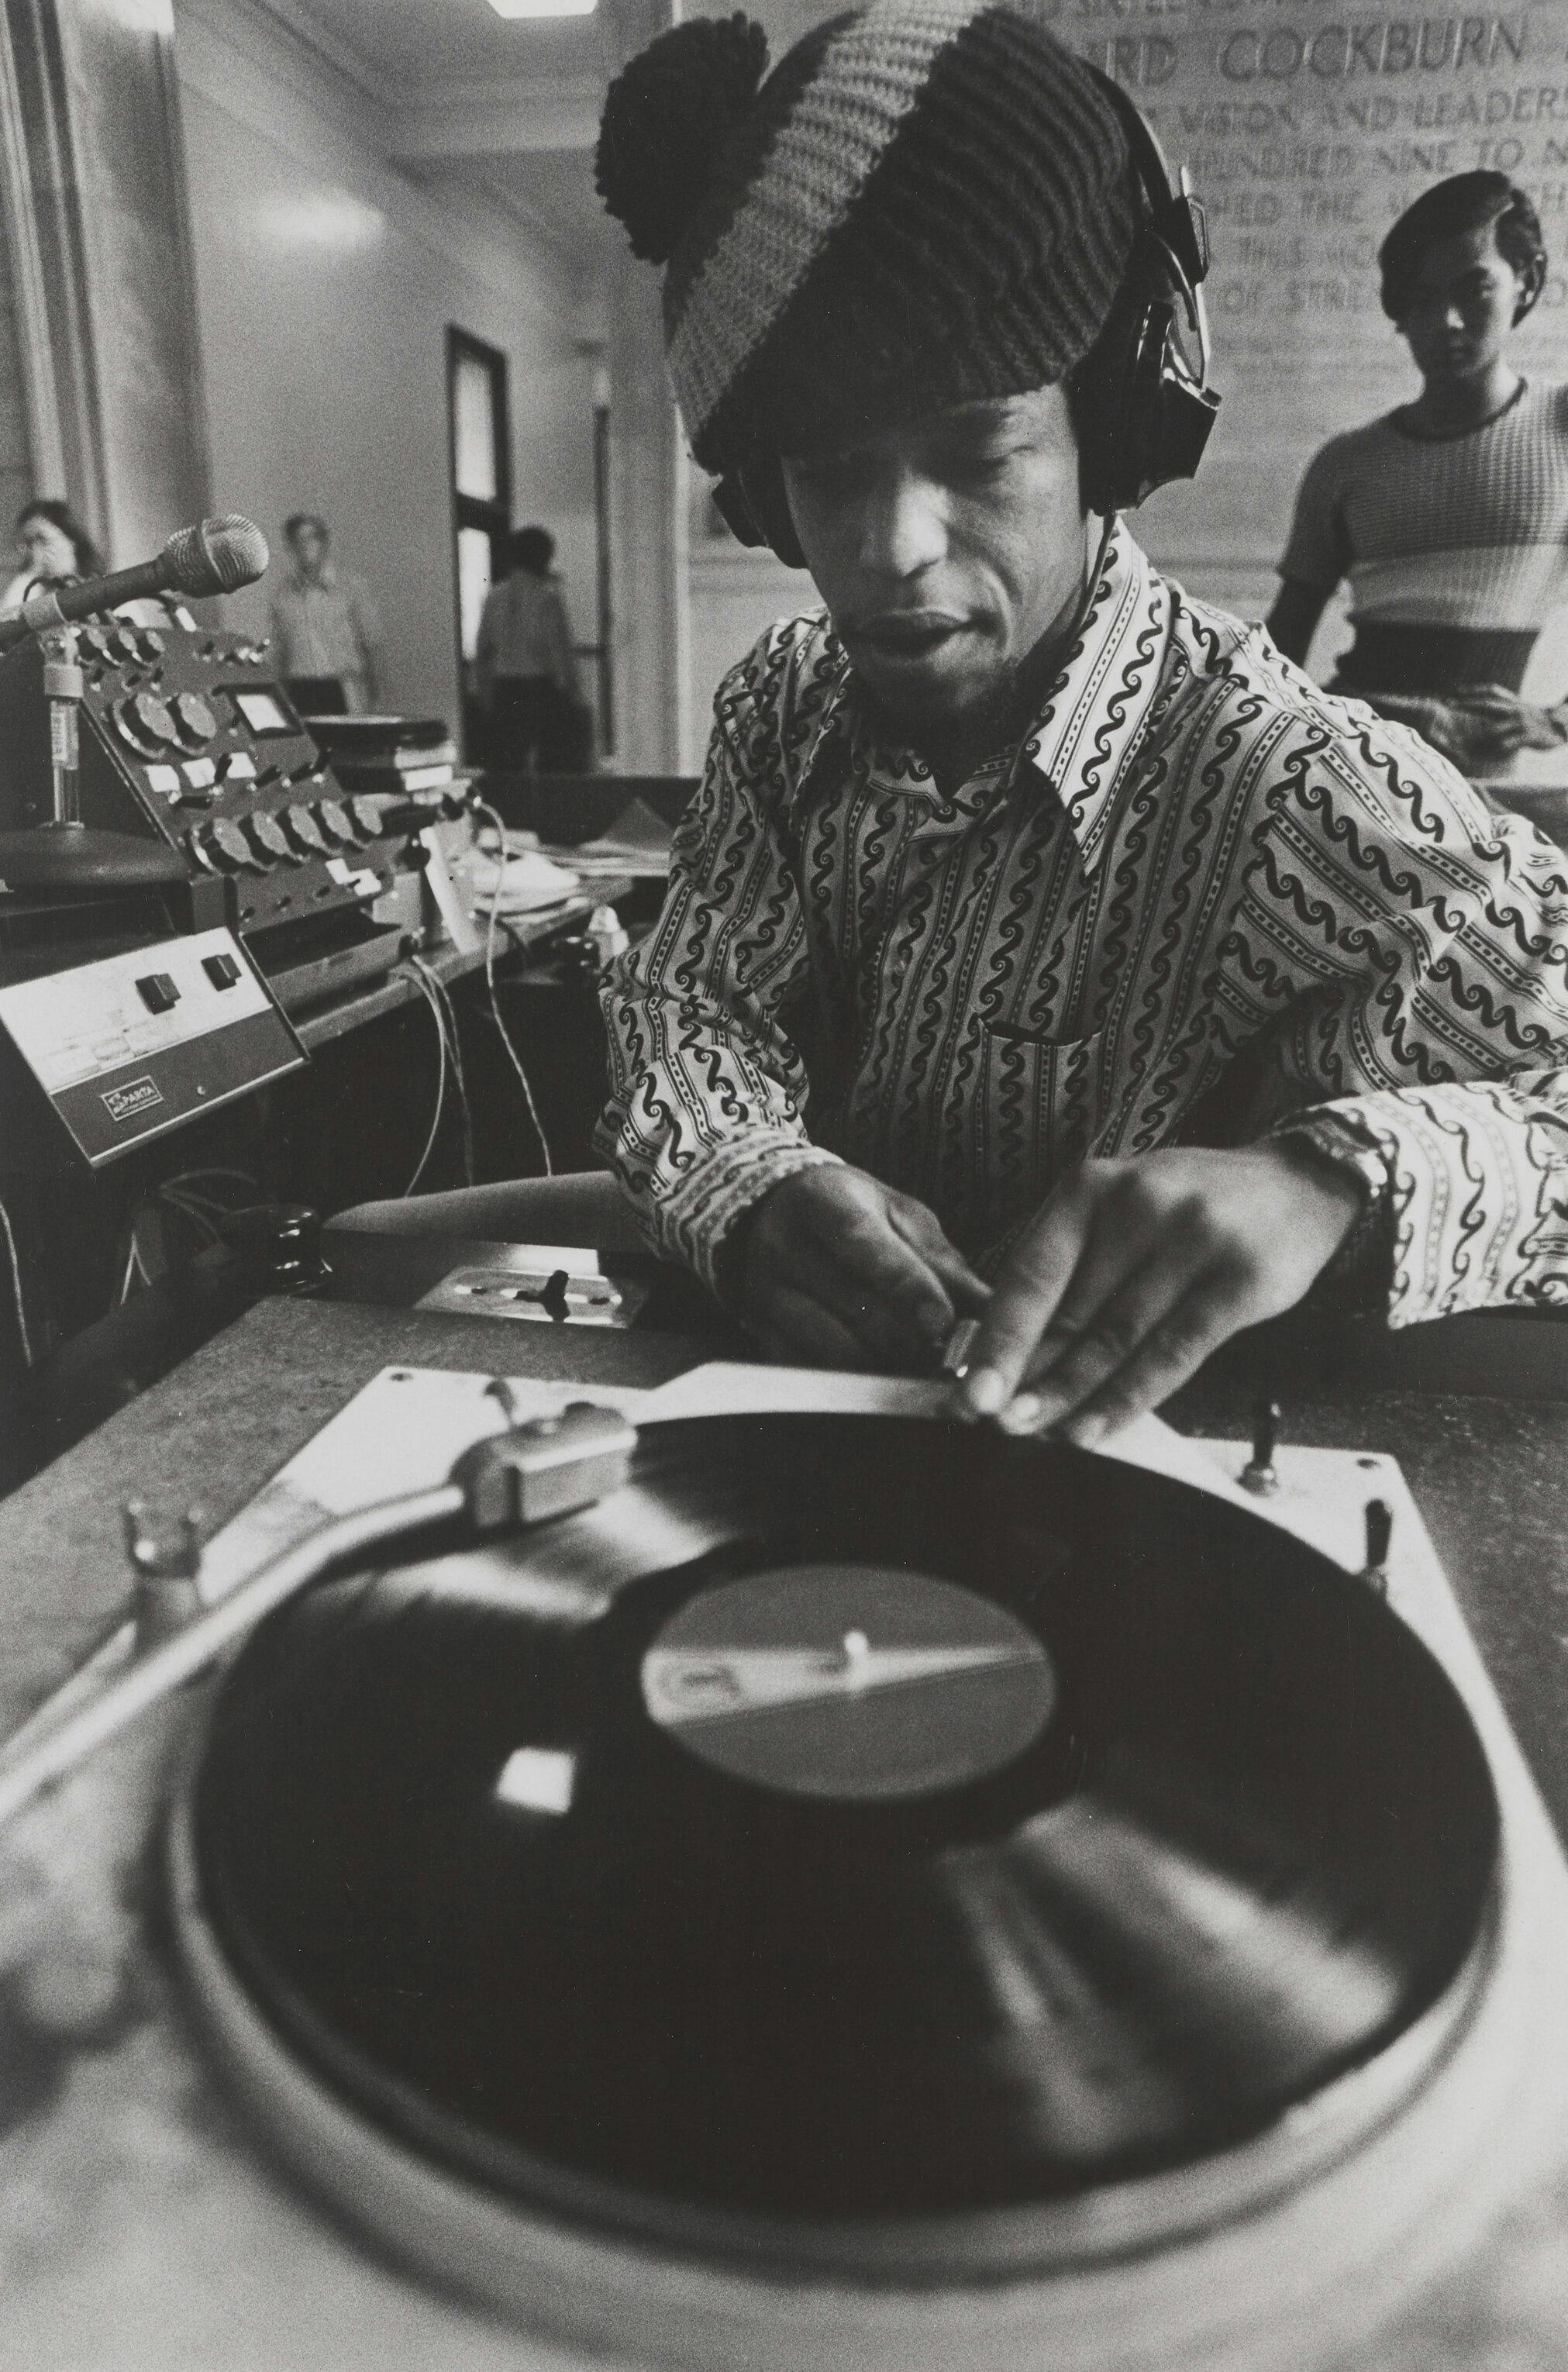 Archival image of W. Ahmed Salih deejaying